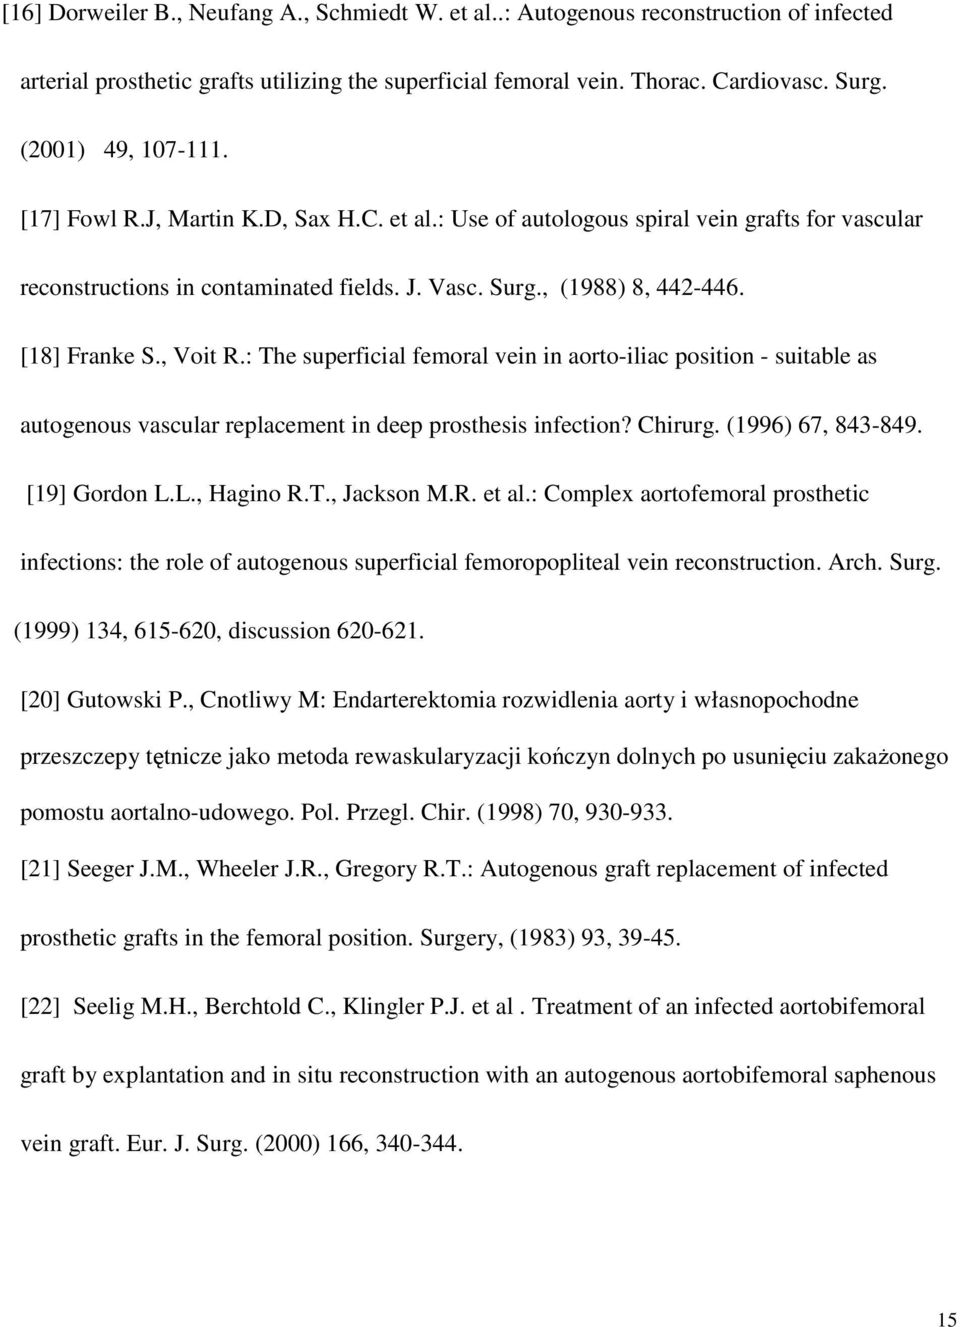 [18] Franke S., Voit R.: The superficial femoral vein in aorto-iliac position - suitable as autogenous vascular replacement in deep prosthesis infection? Chirurg. (1996) 67, 843-849. [19] Gordon L.